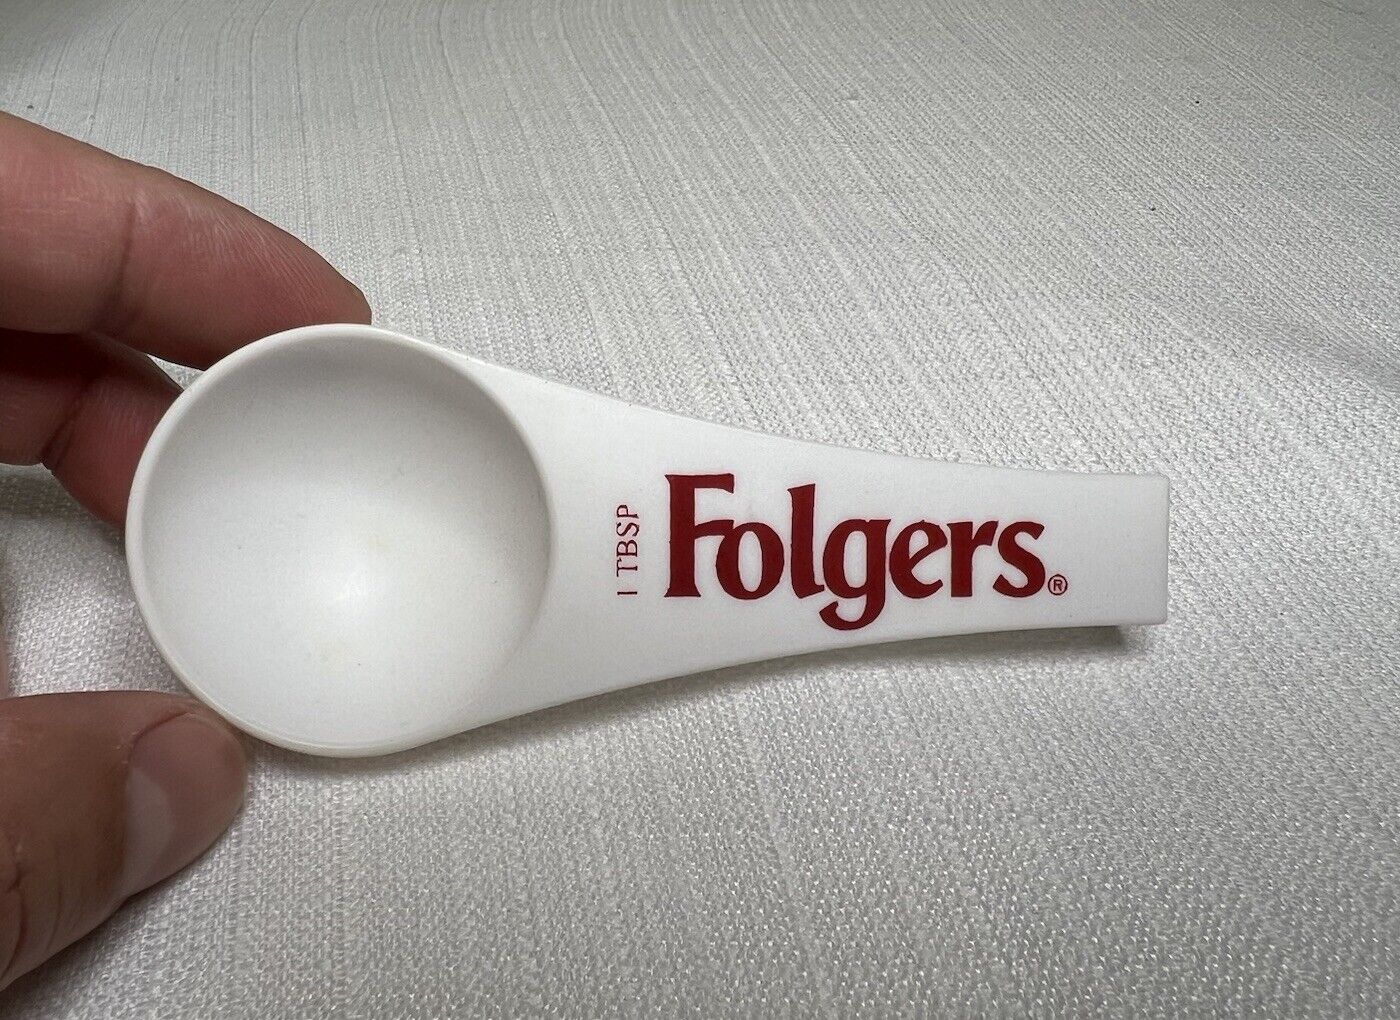 VTG Folgers Coffee Measuring Spoon 1 tbs. White w/ Red Lettering